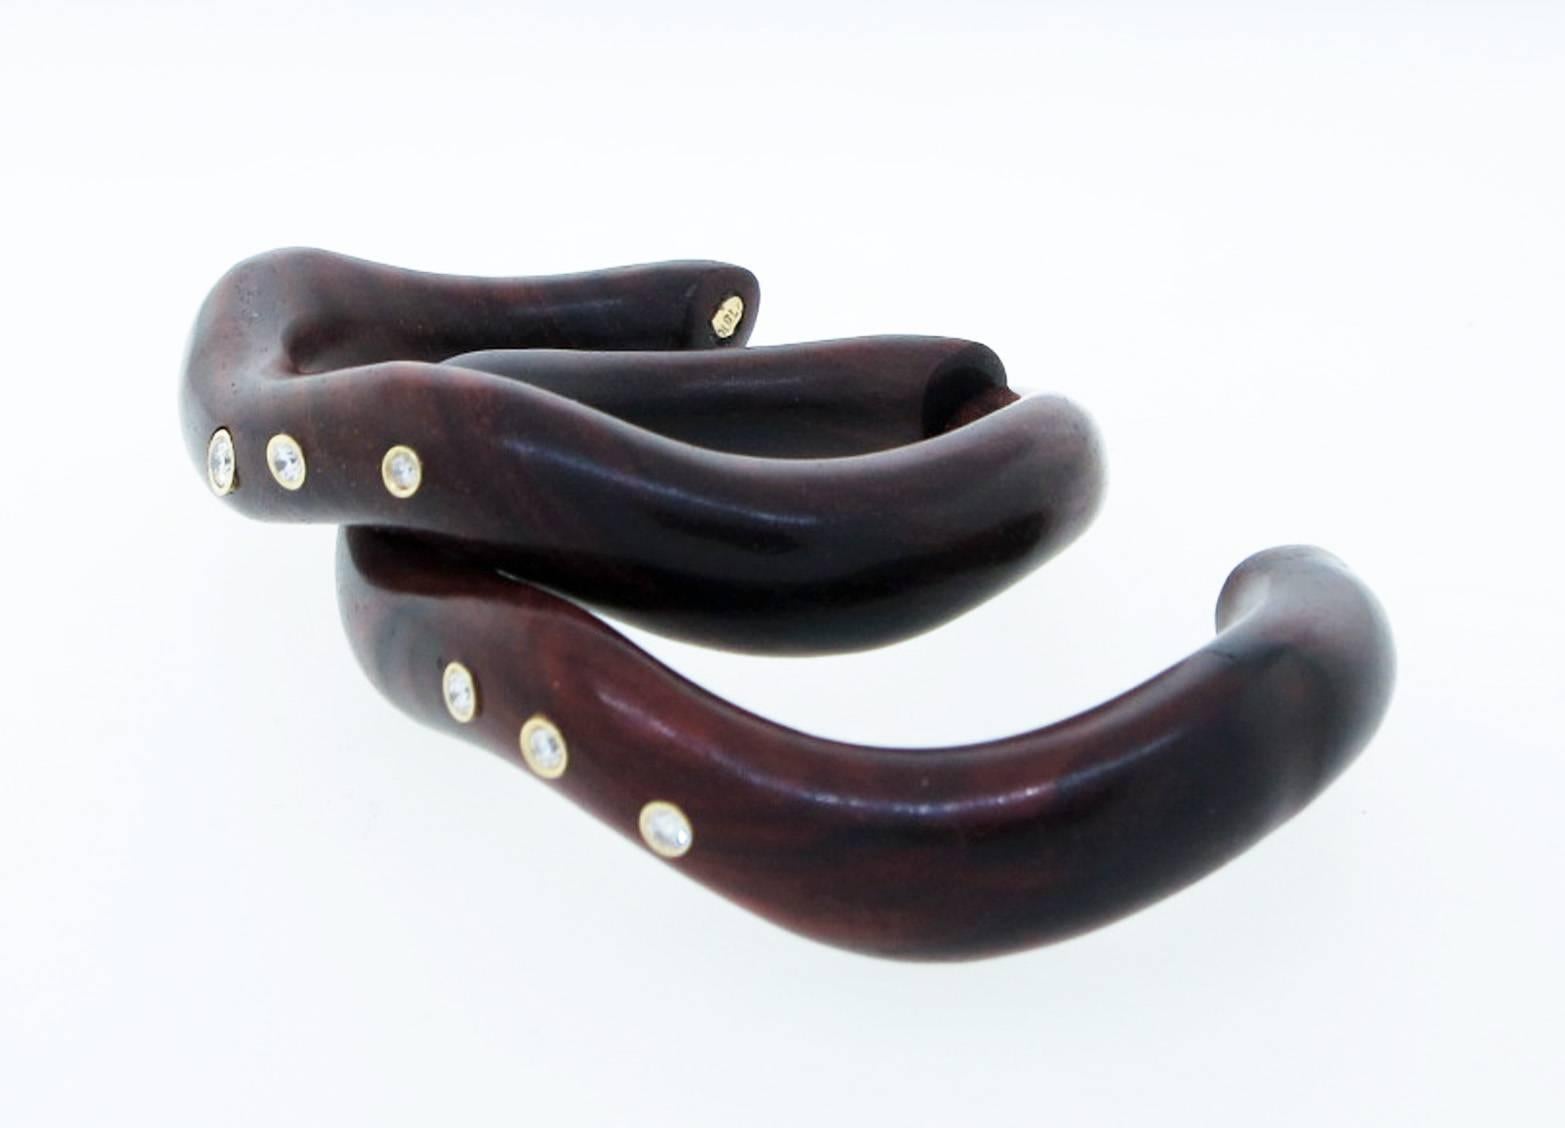 A nestling pair of natural softly polished and beautifully grained rosewood cuff bracelets. Each cuff can be worn separately or together and are bezel set in 18kt. yellow gold with three round brilliant cut diamonds totaling approx .40cts.
The cuffs